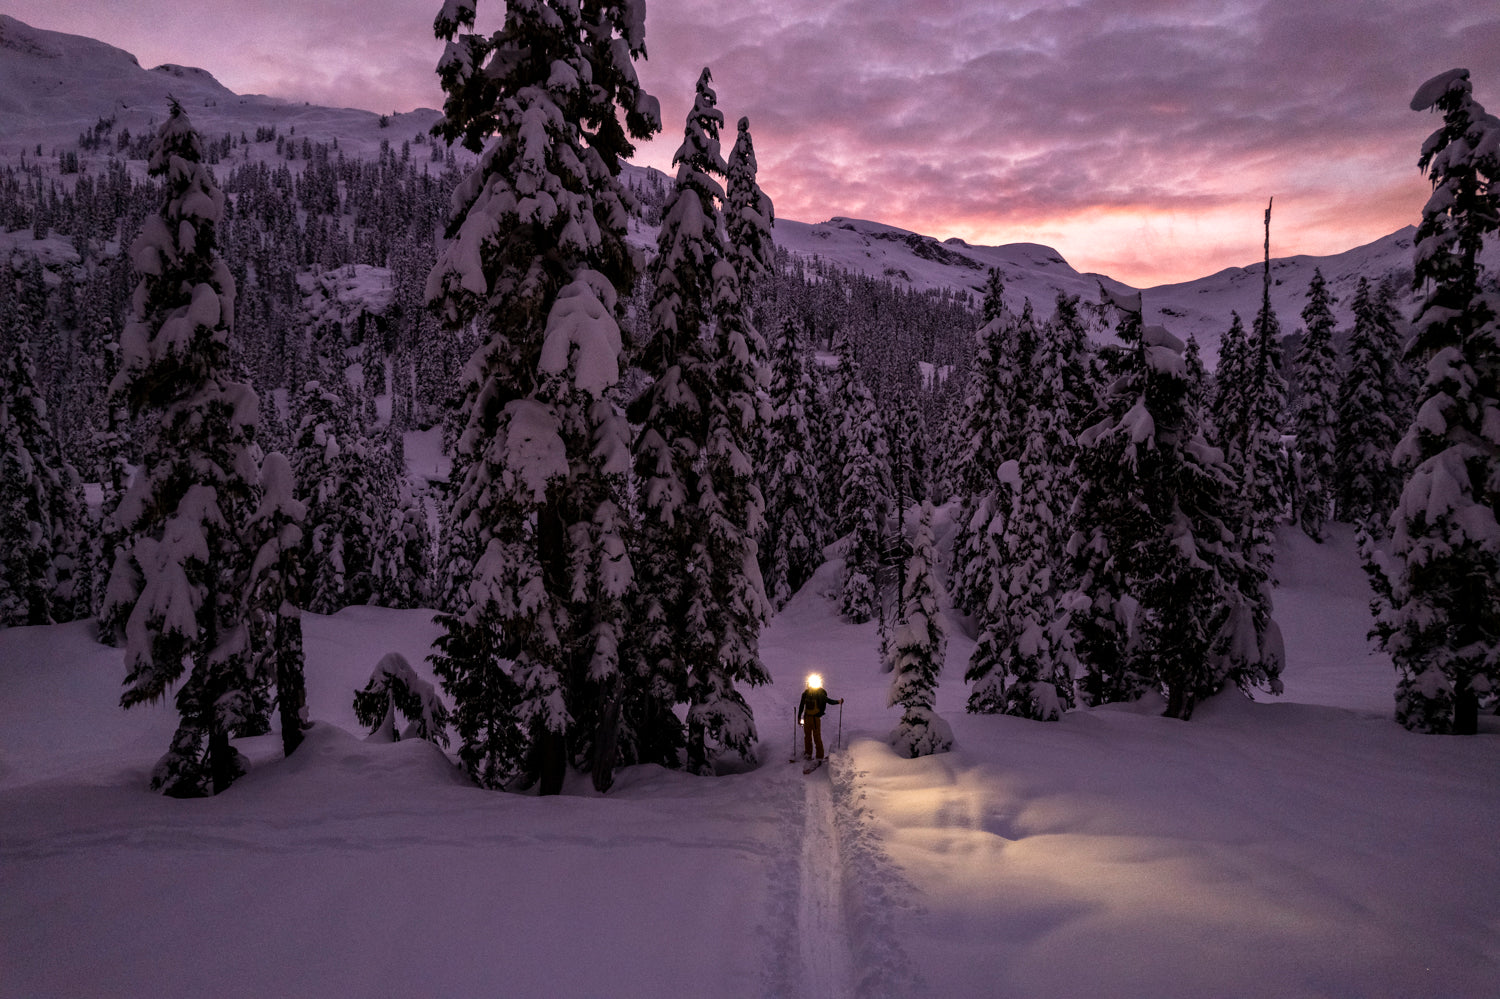 Canadian landscape and adventure photographer. Whistler, BC.